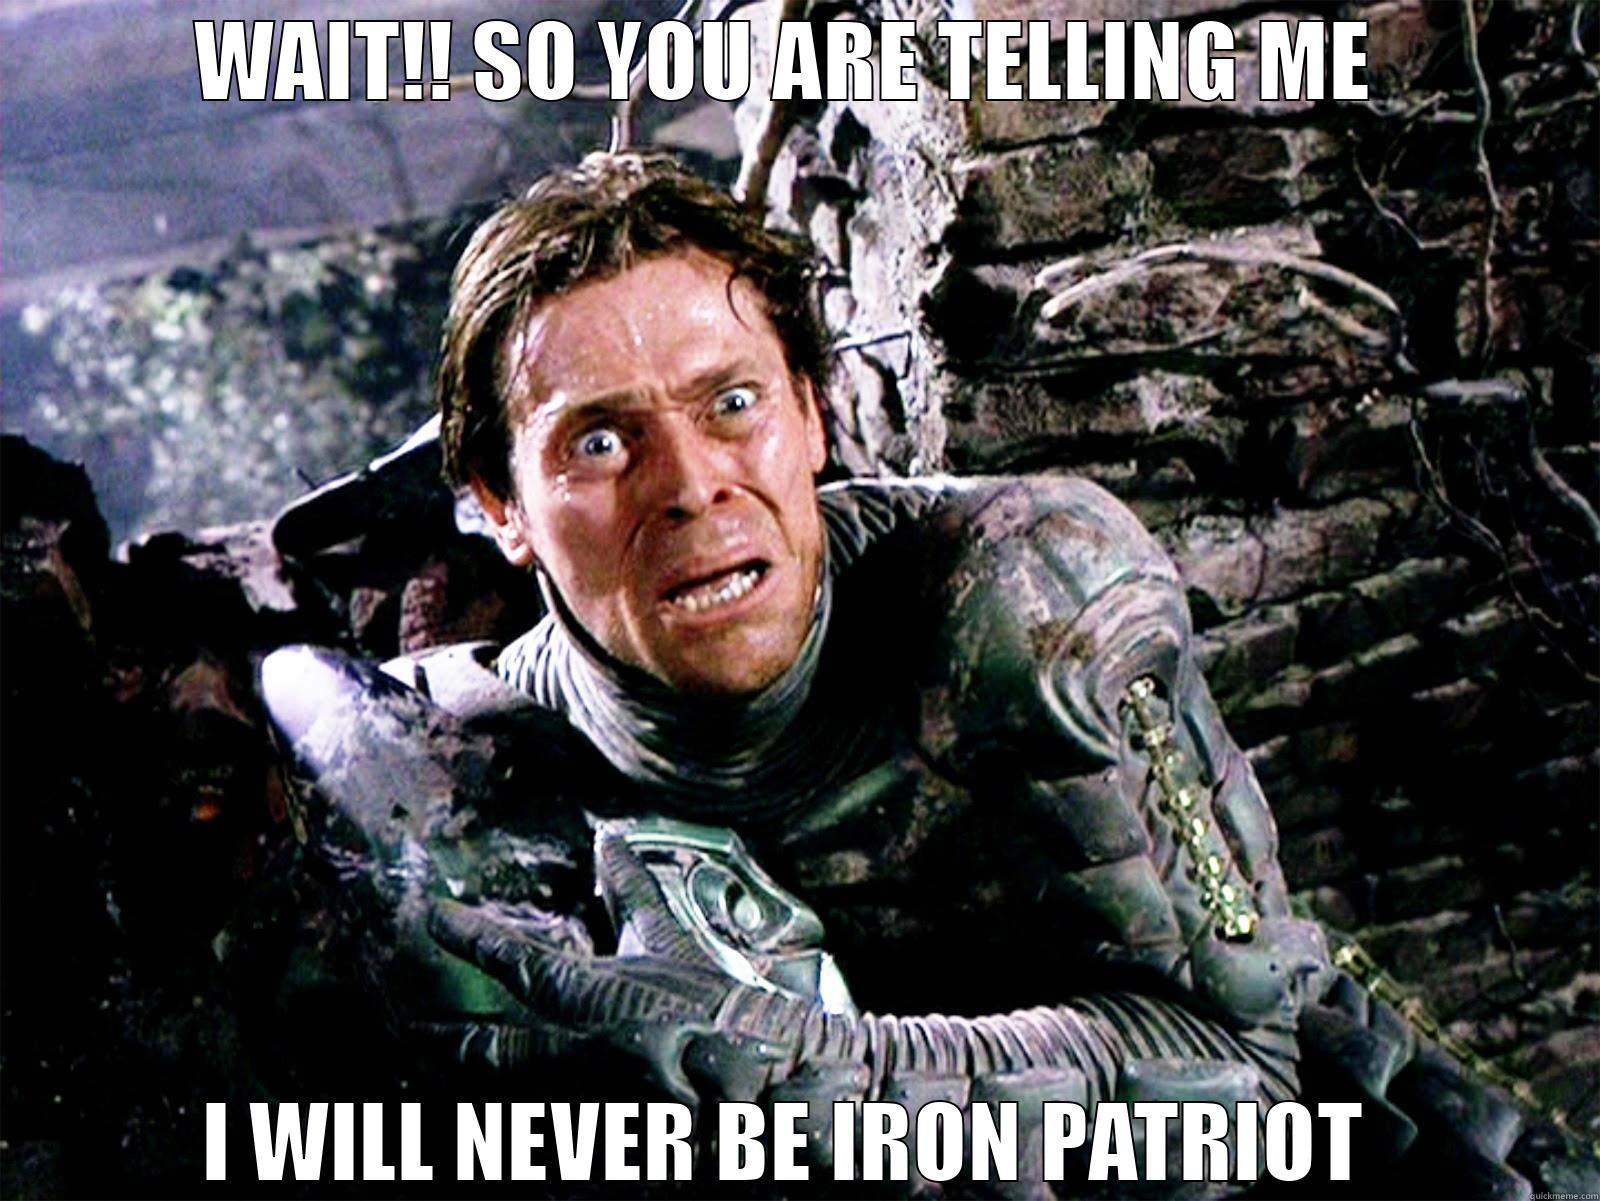 Spiderman memes - WAIT!! SO YOU ARE TELLING ME  I WILL NEVER BE IRON PATRIOT  Misc